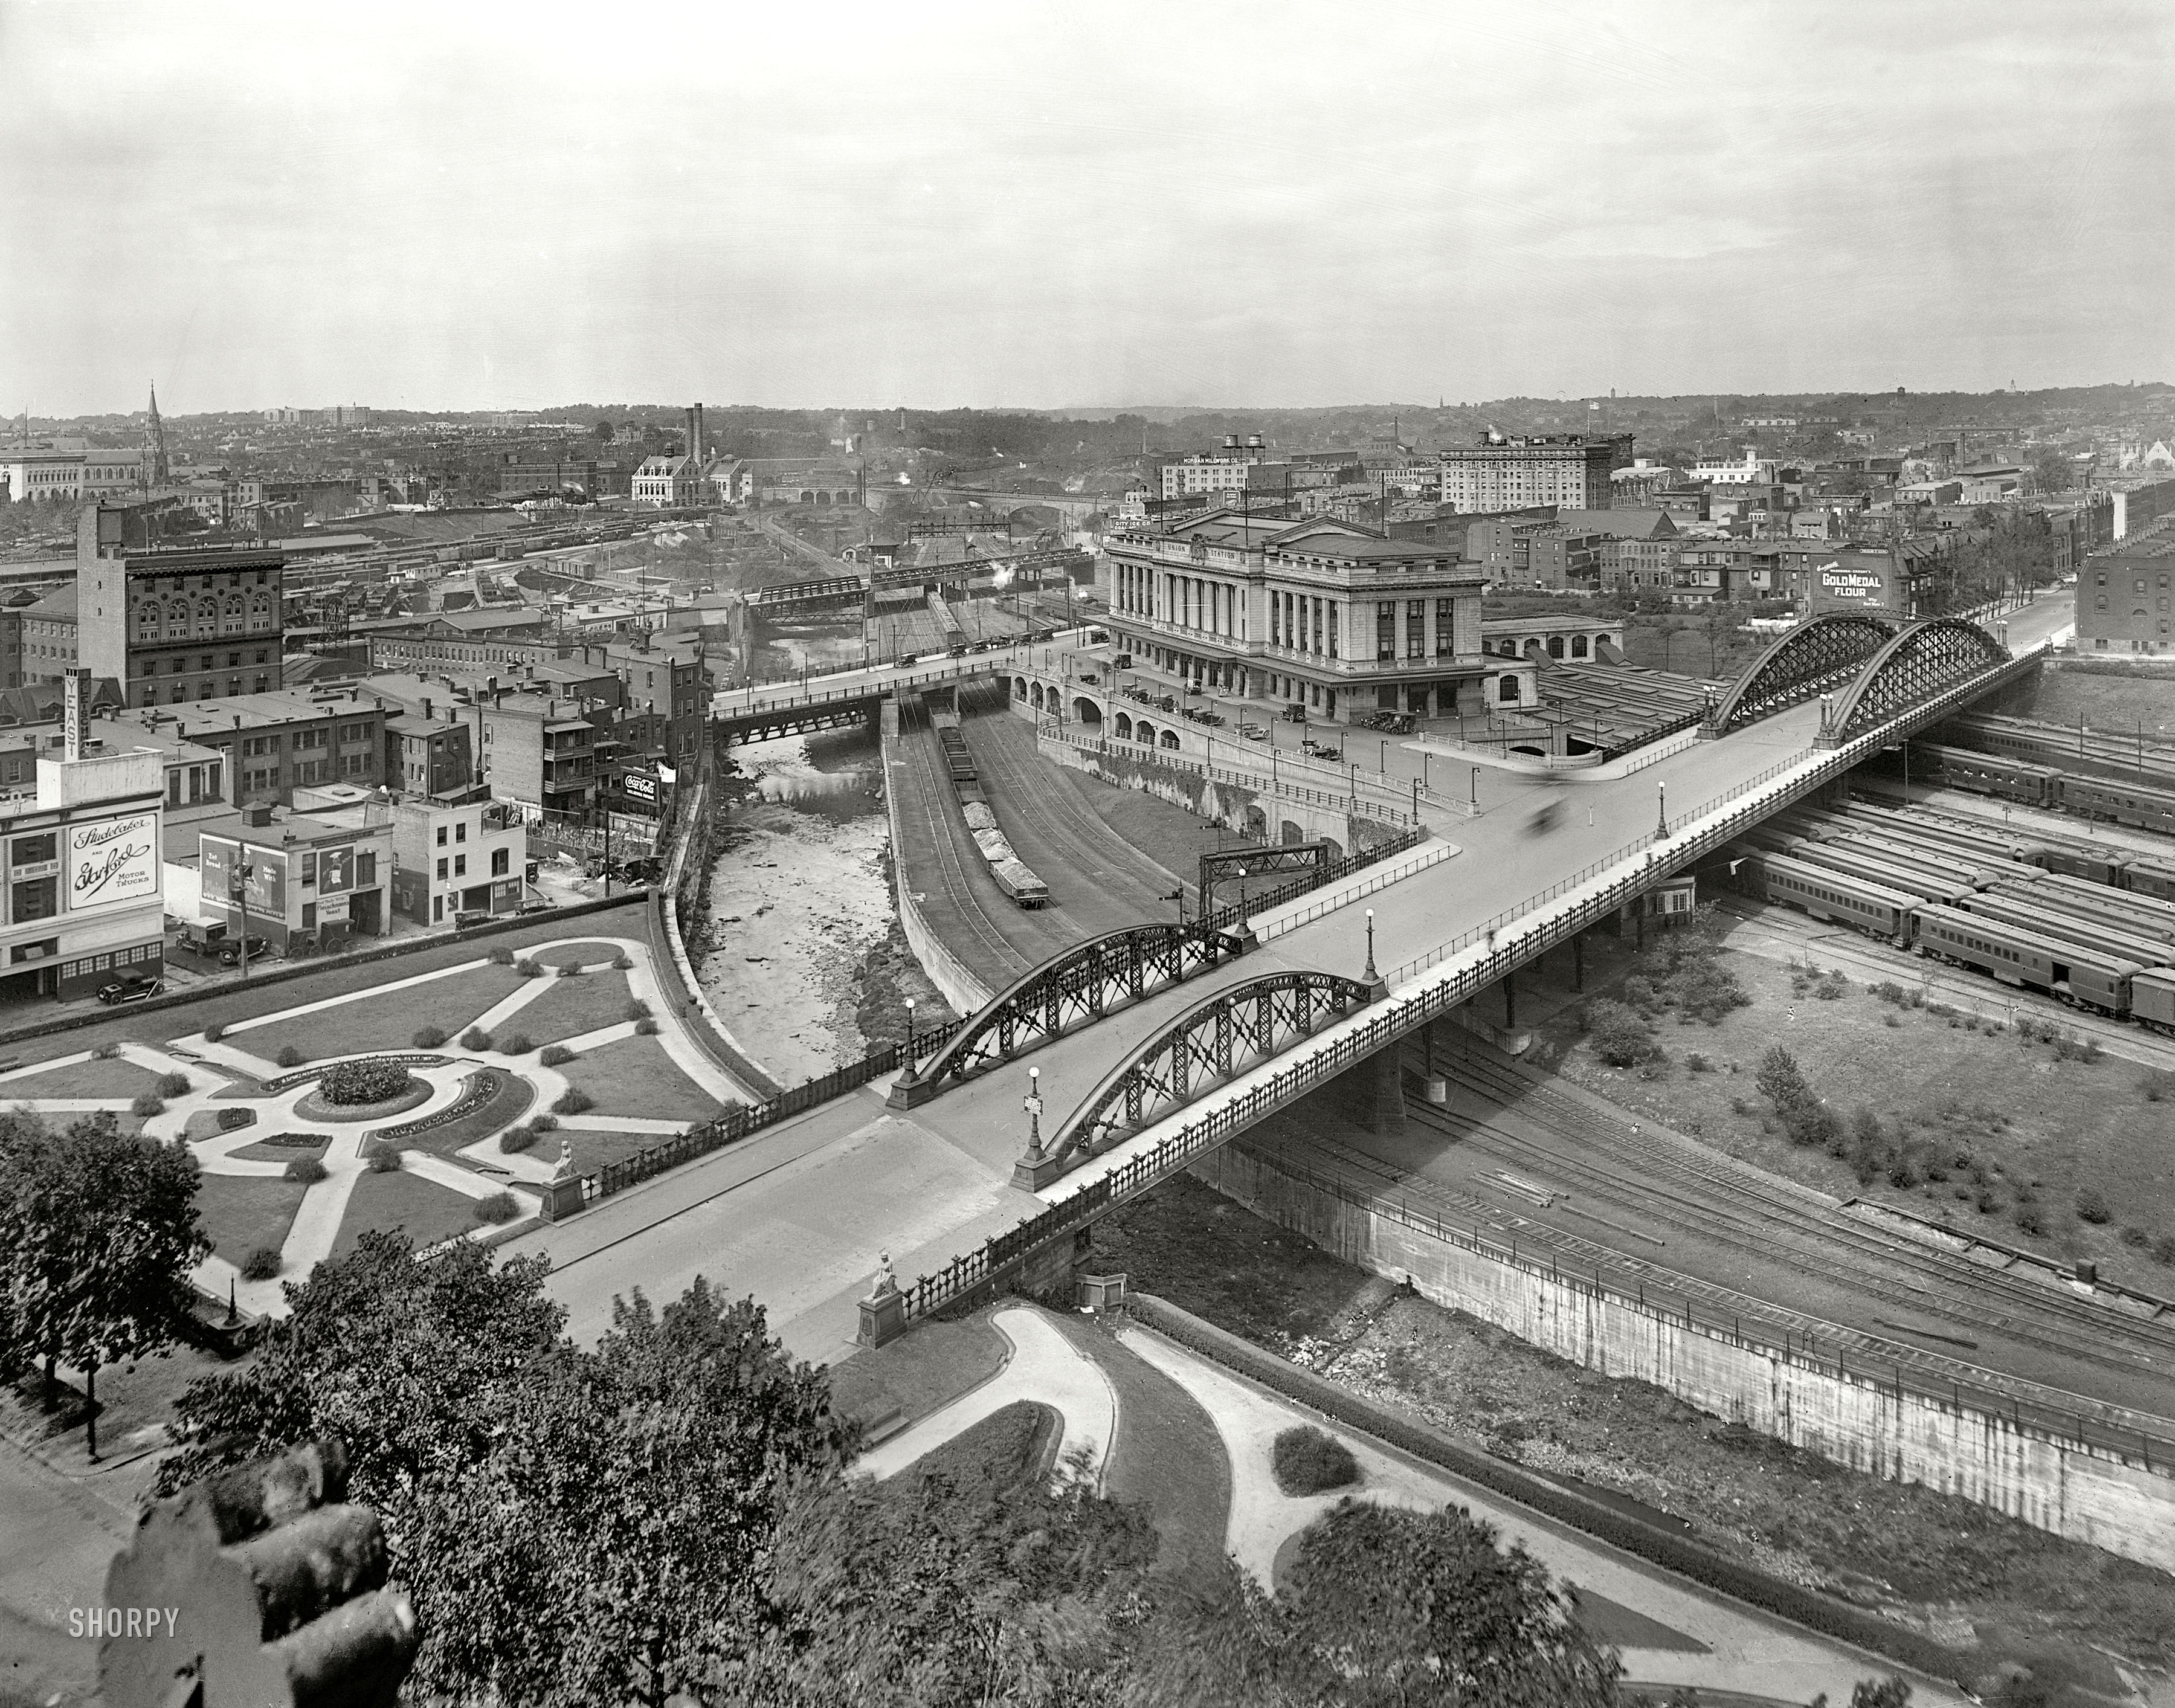 Baltimore, Maryland, circa 1917. "Union Station showing Charles Street and Jones Falls." 8x10 inch glass negative, Detroit Publishing Company. View full size.